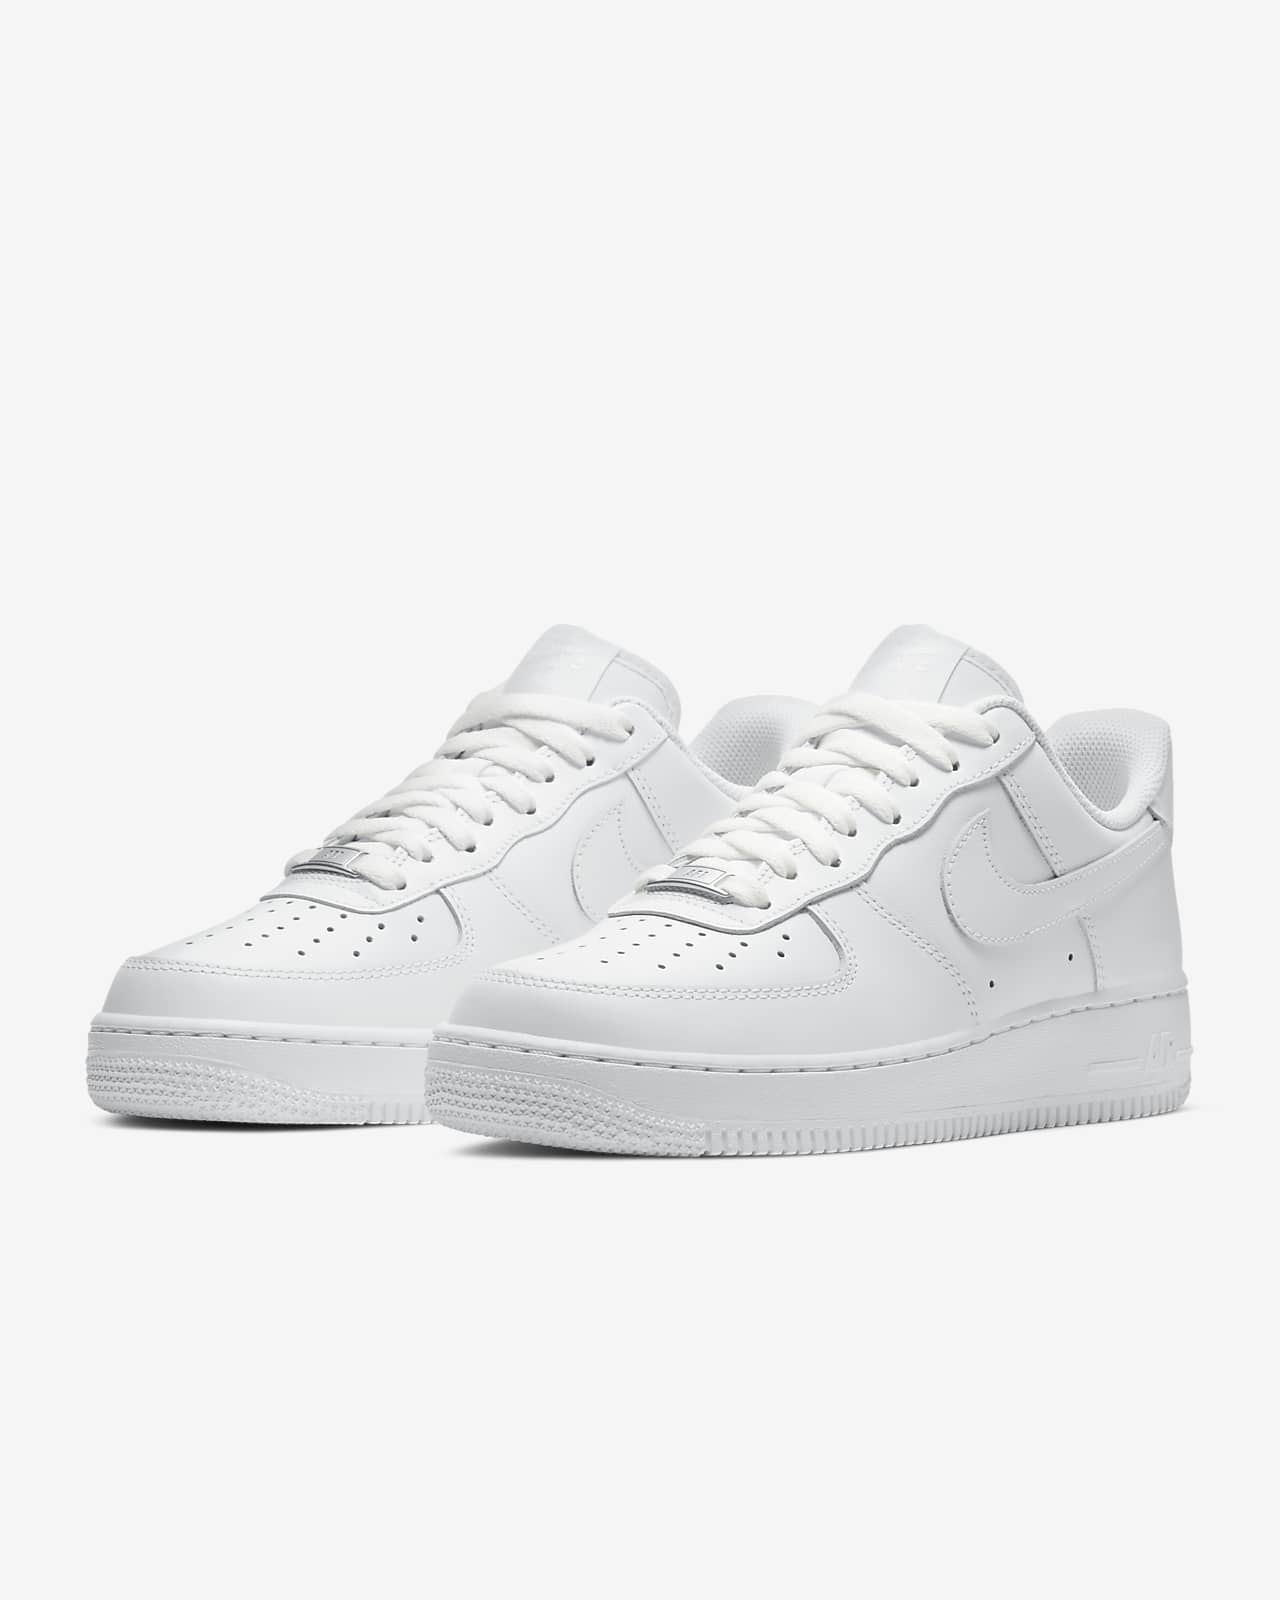 women's size 7.5 air force 1